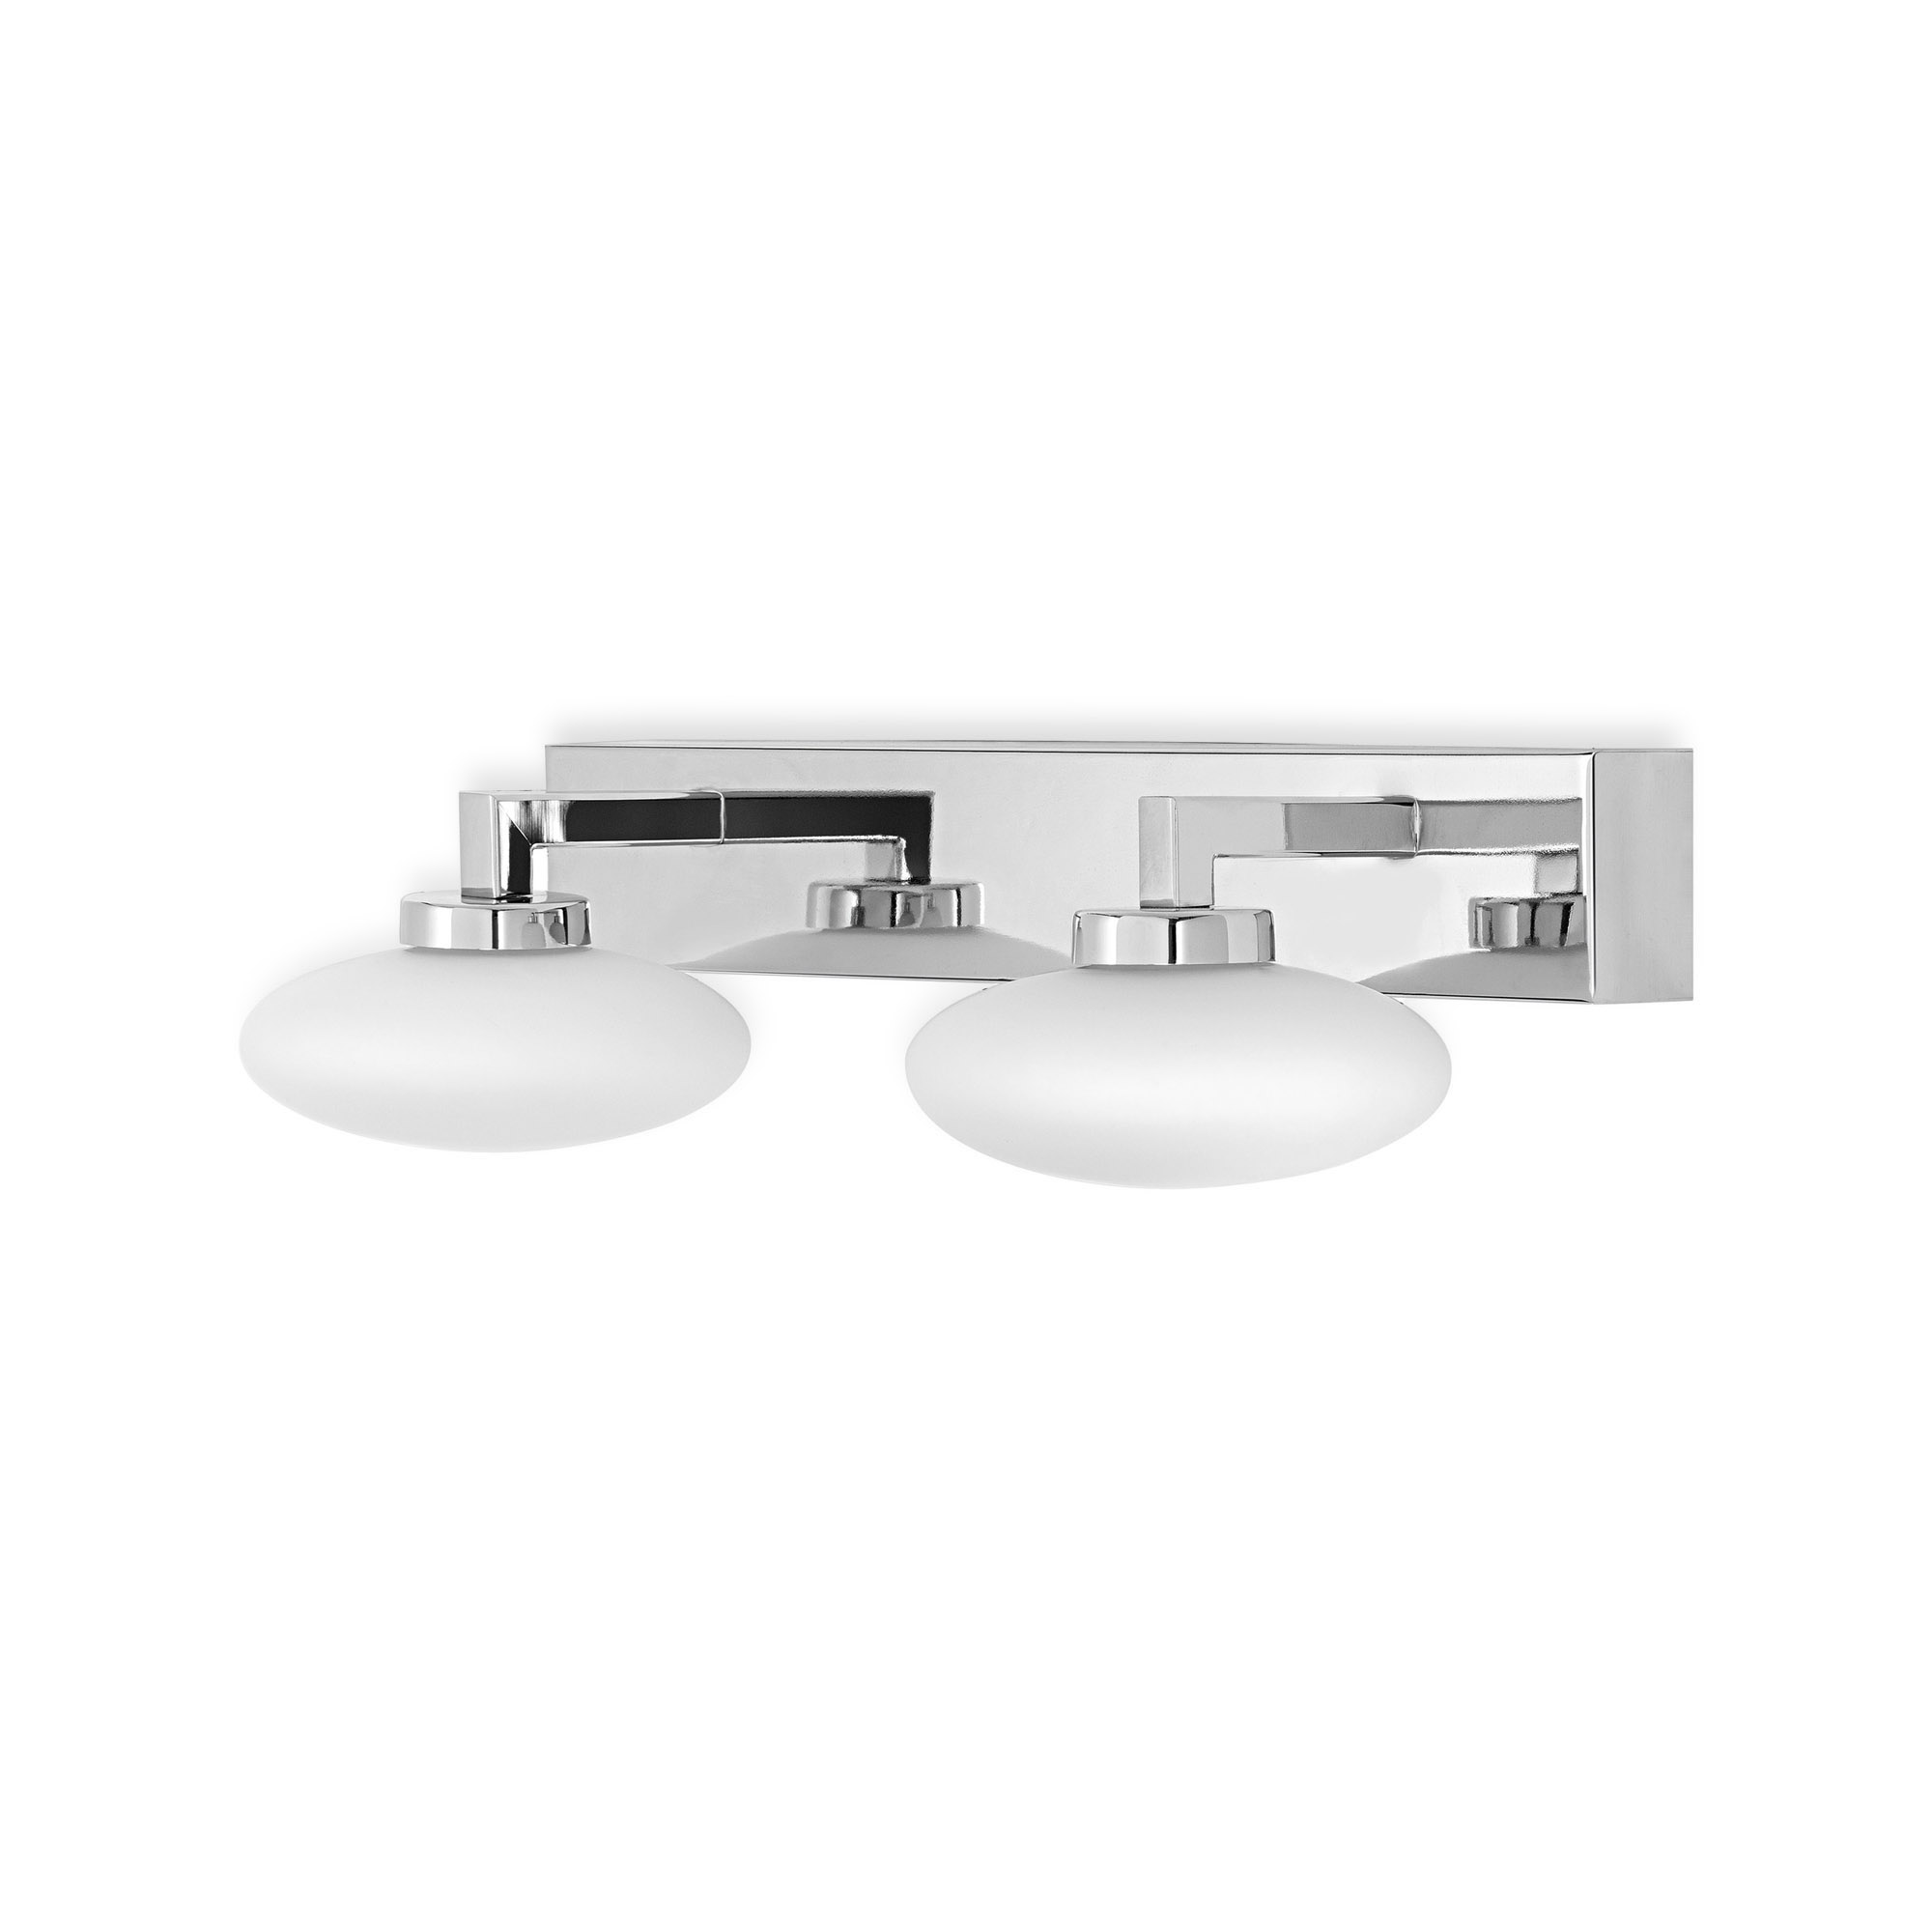 LEDVANCE SMART+ WiFi Tunable White LED Wall Light ORBIS Elypse 340mm IP44 silver 1000lm